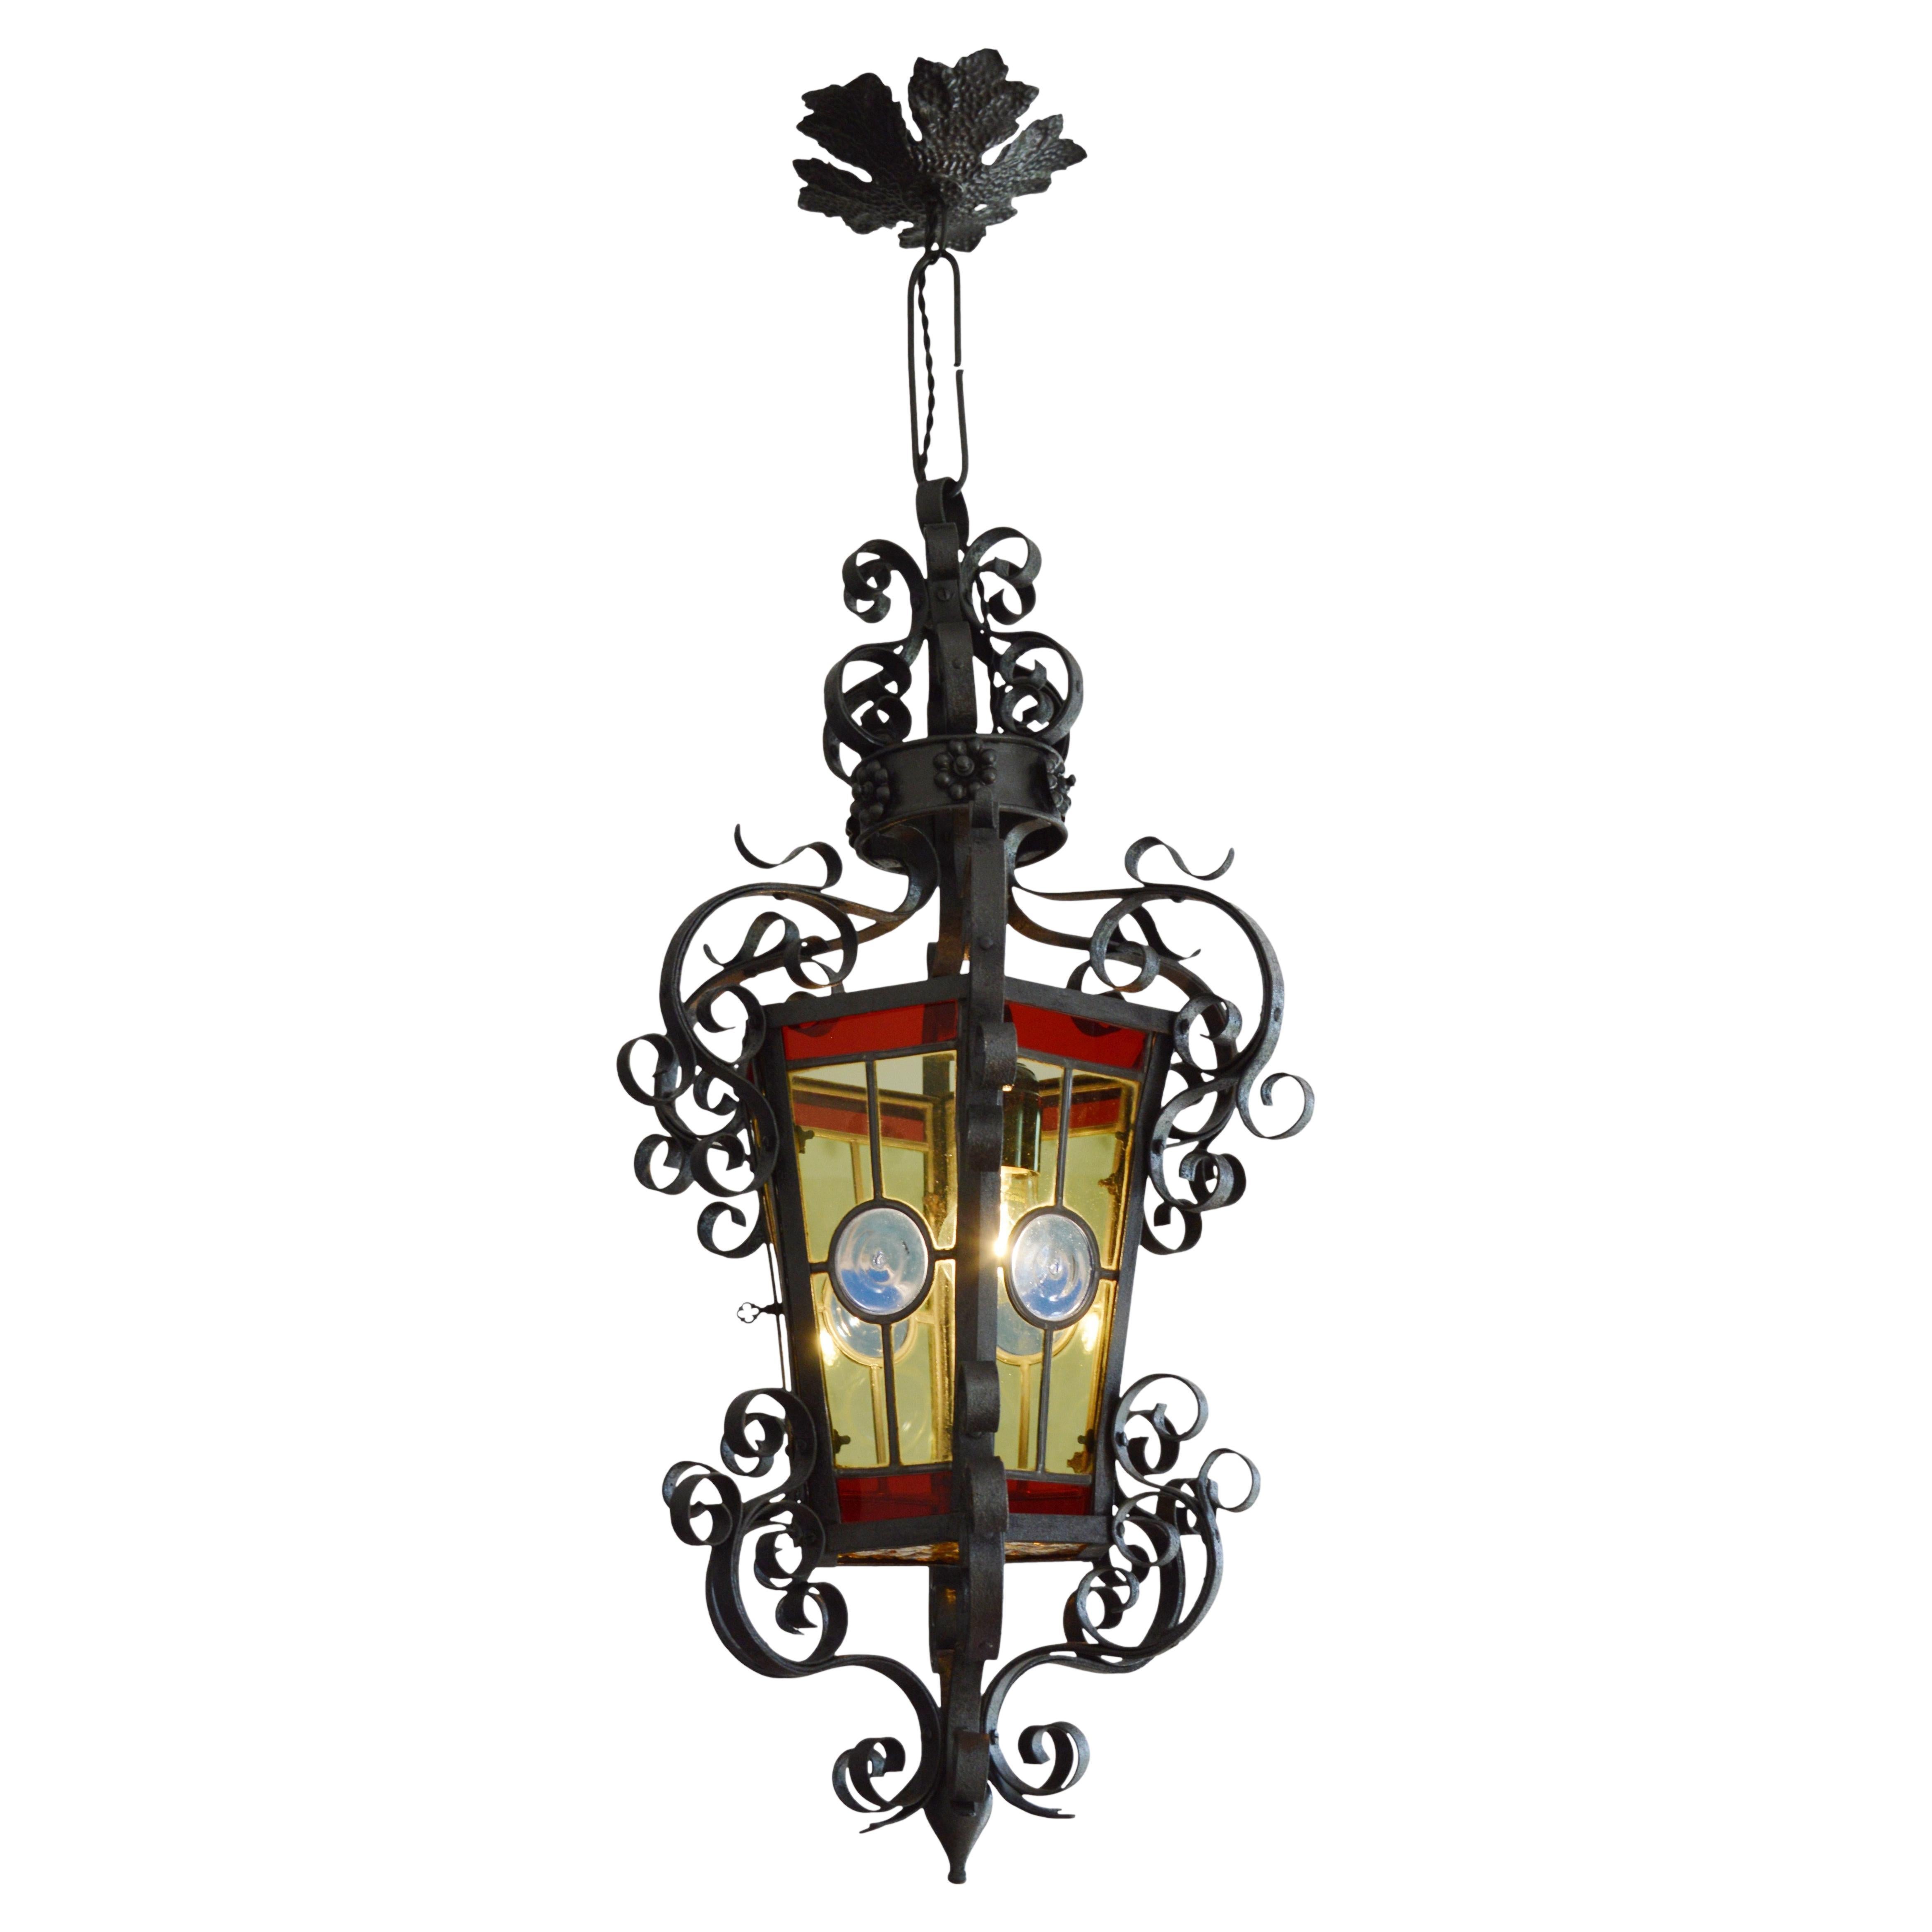 French Art Nouveau Stained-Glass Lantern, 1890-1900 For Sale